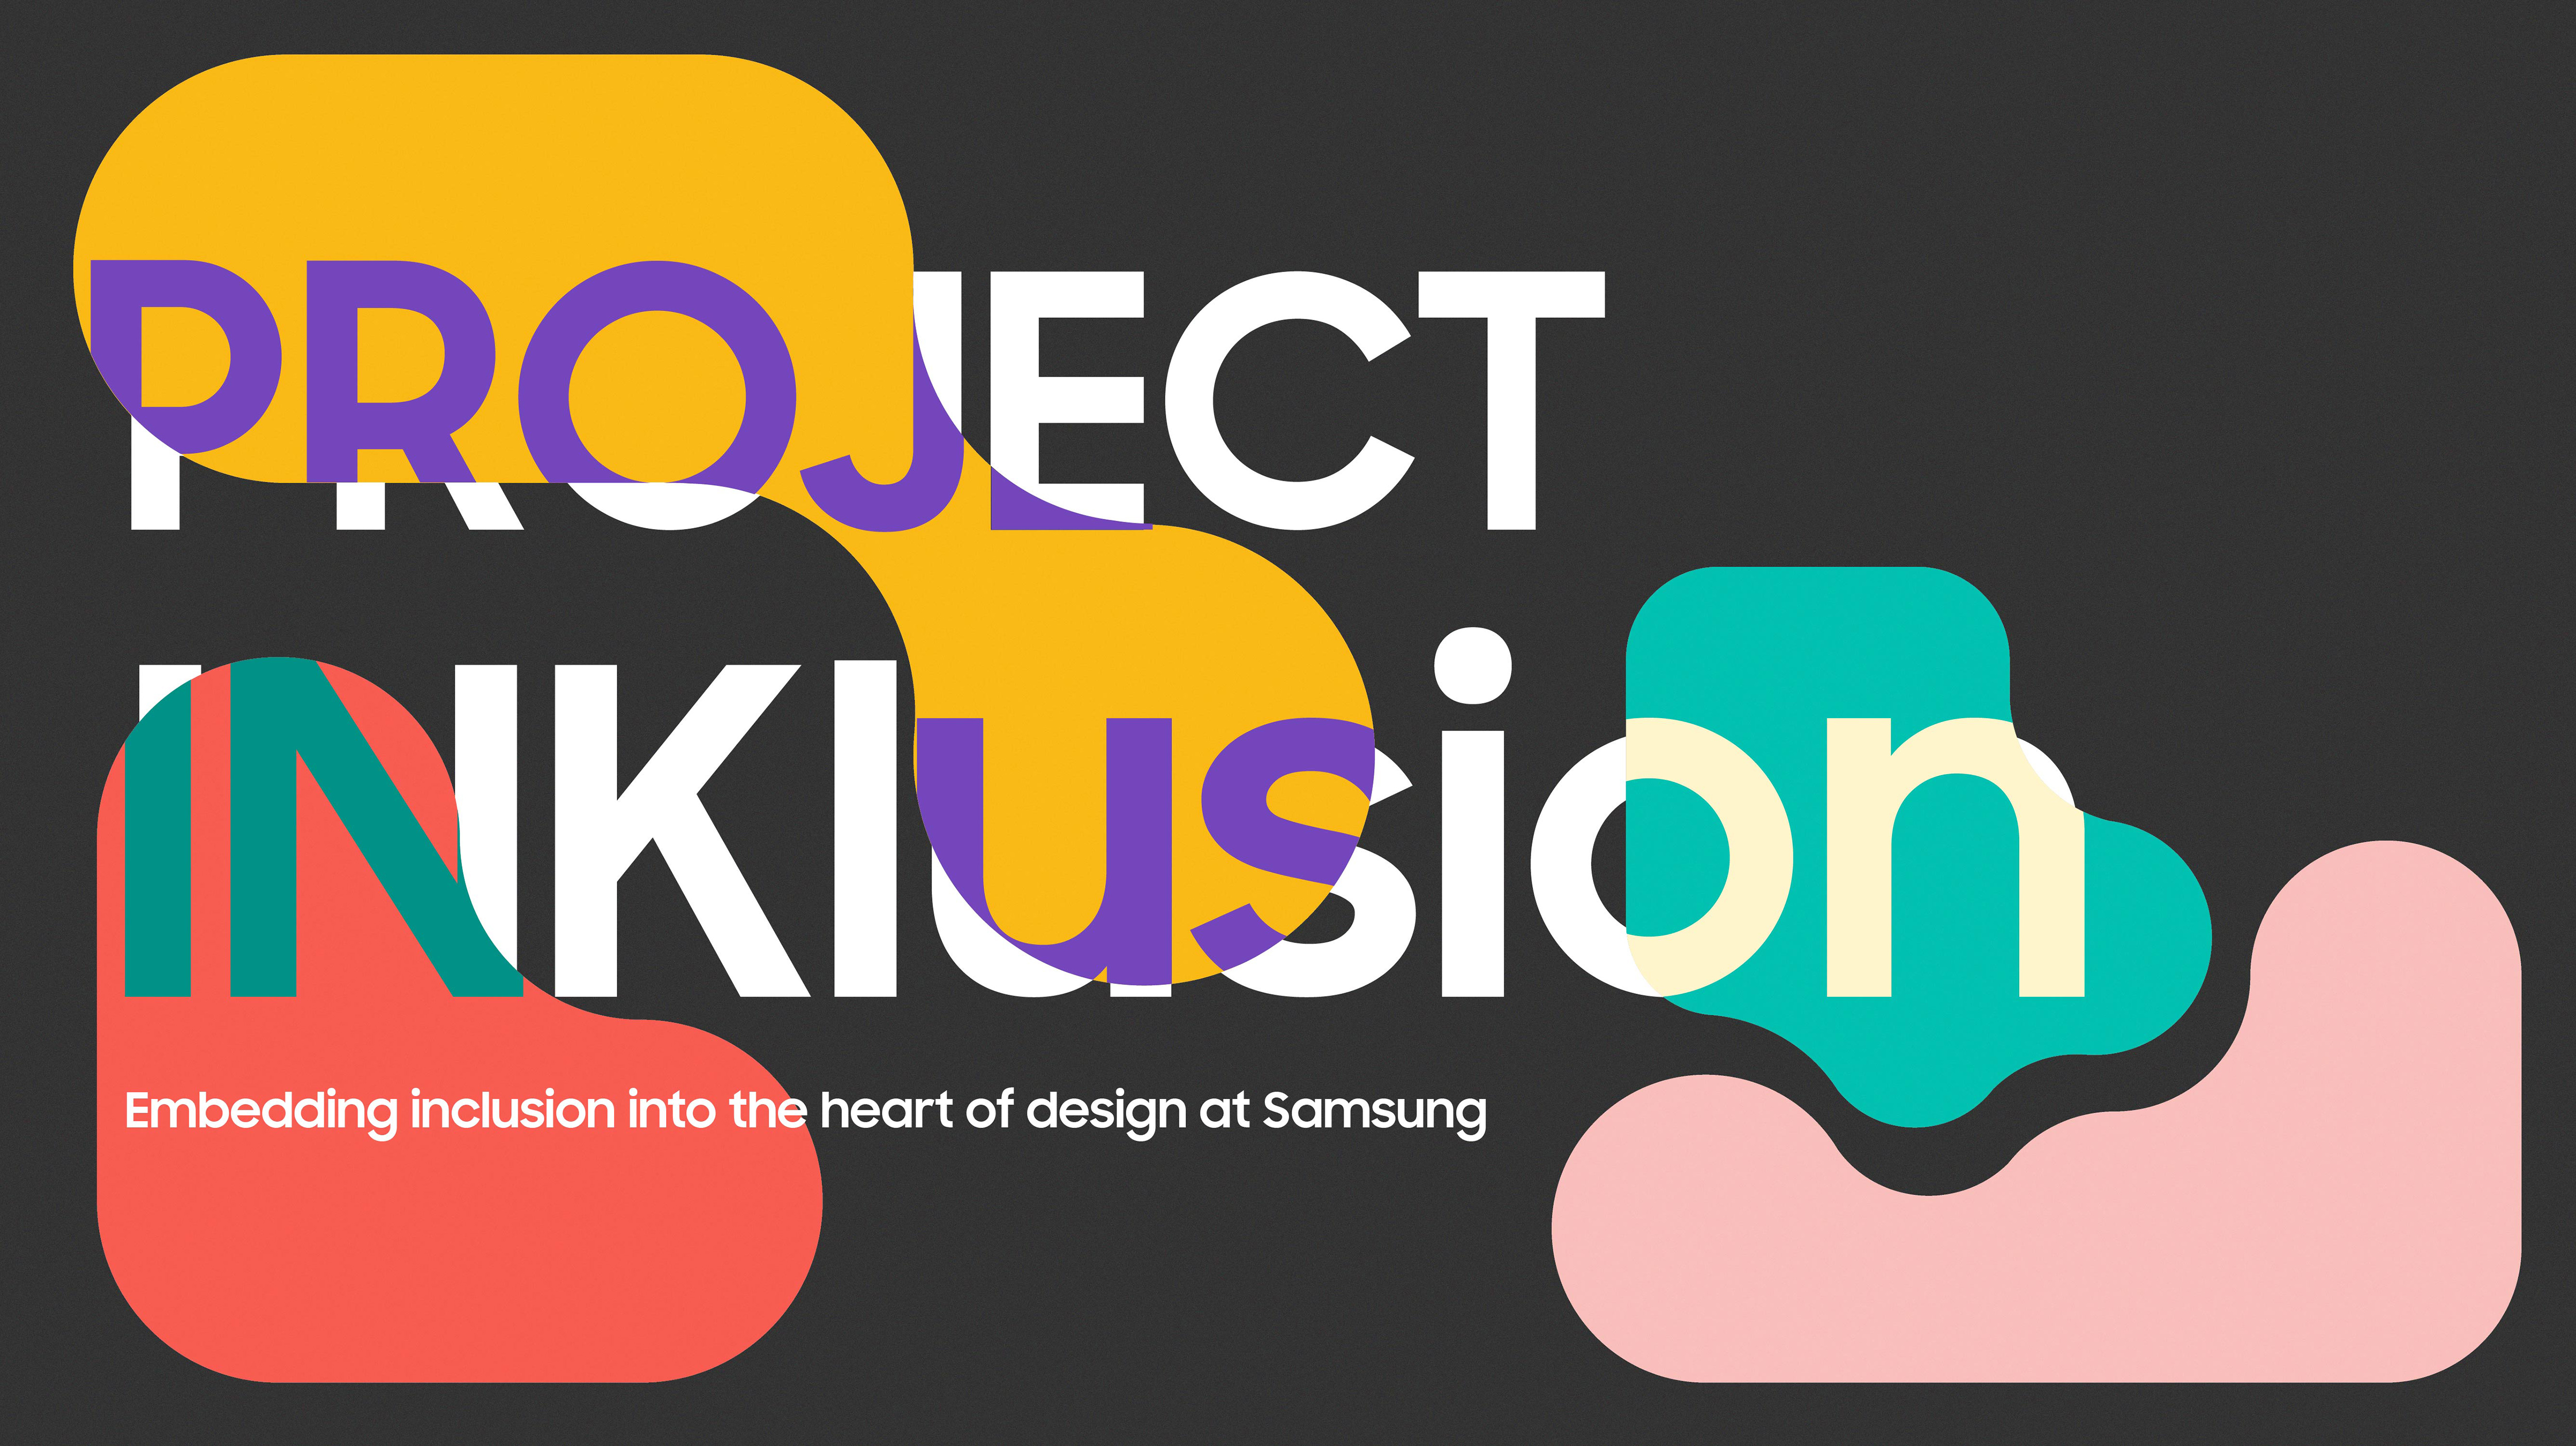 Project INKlusion